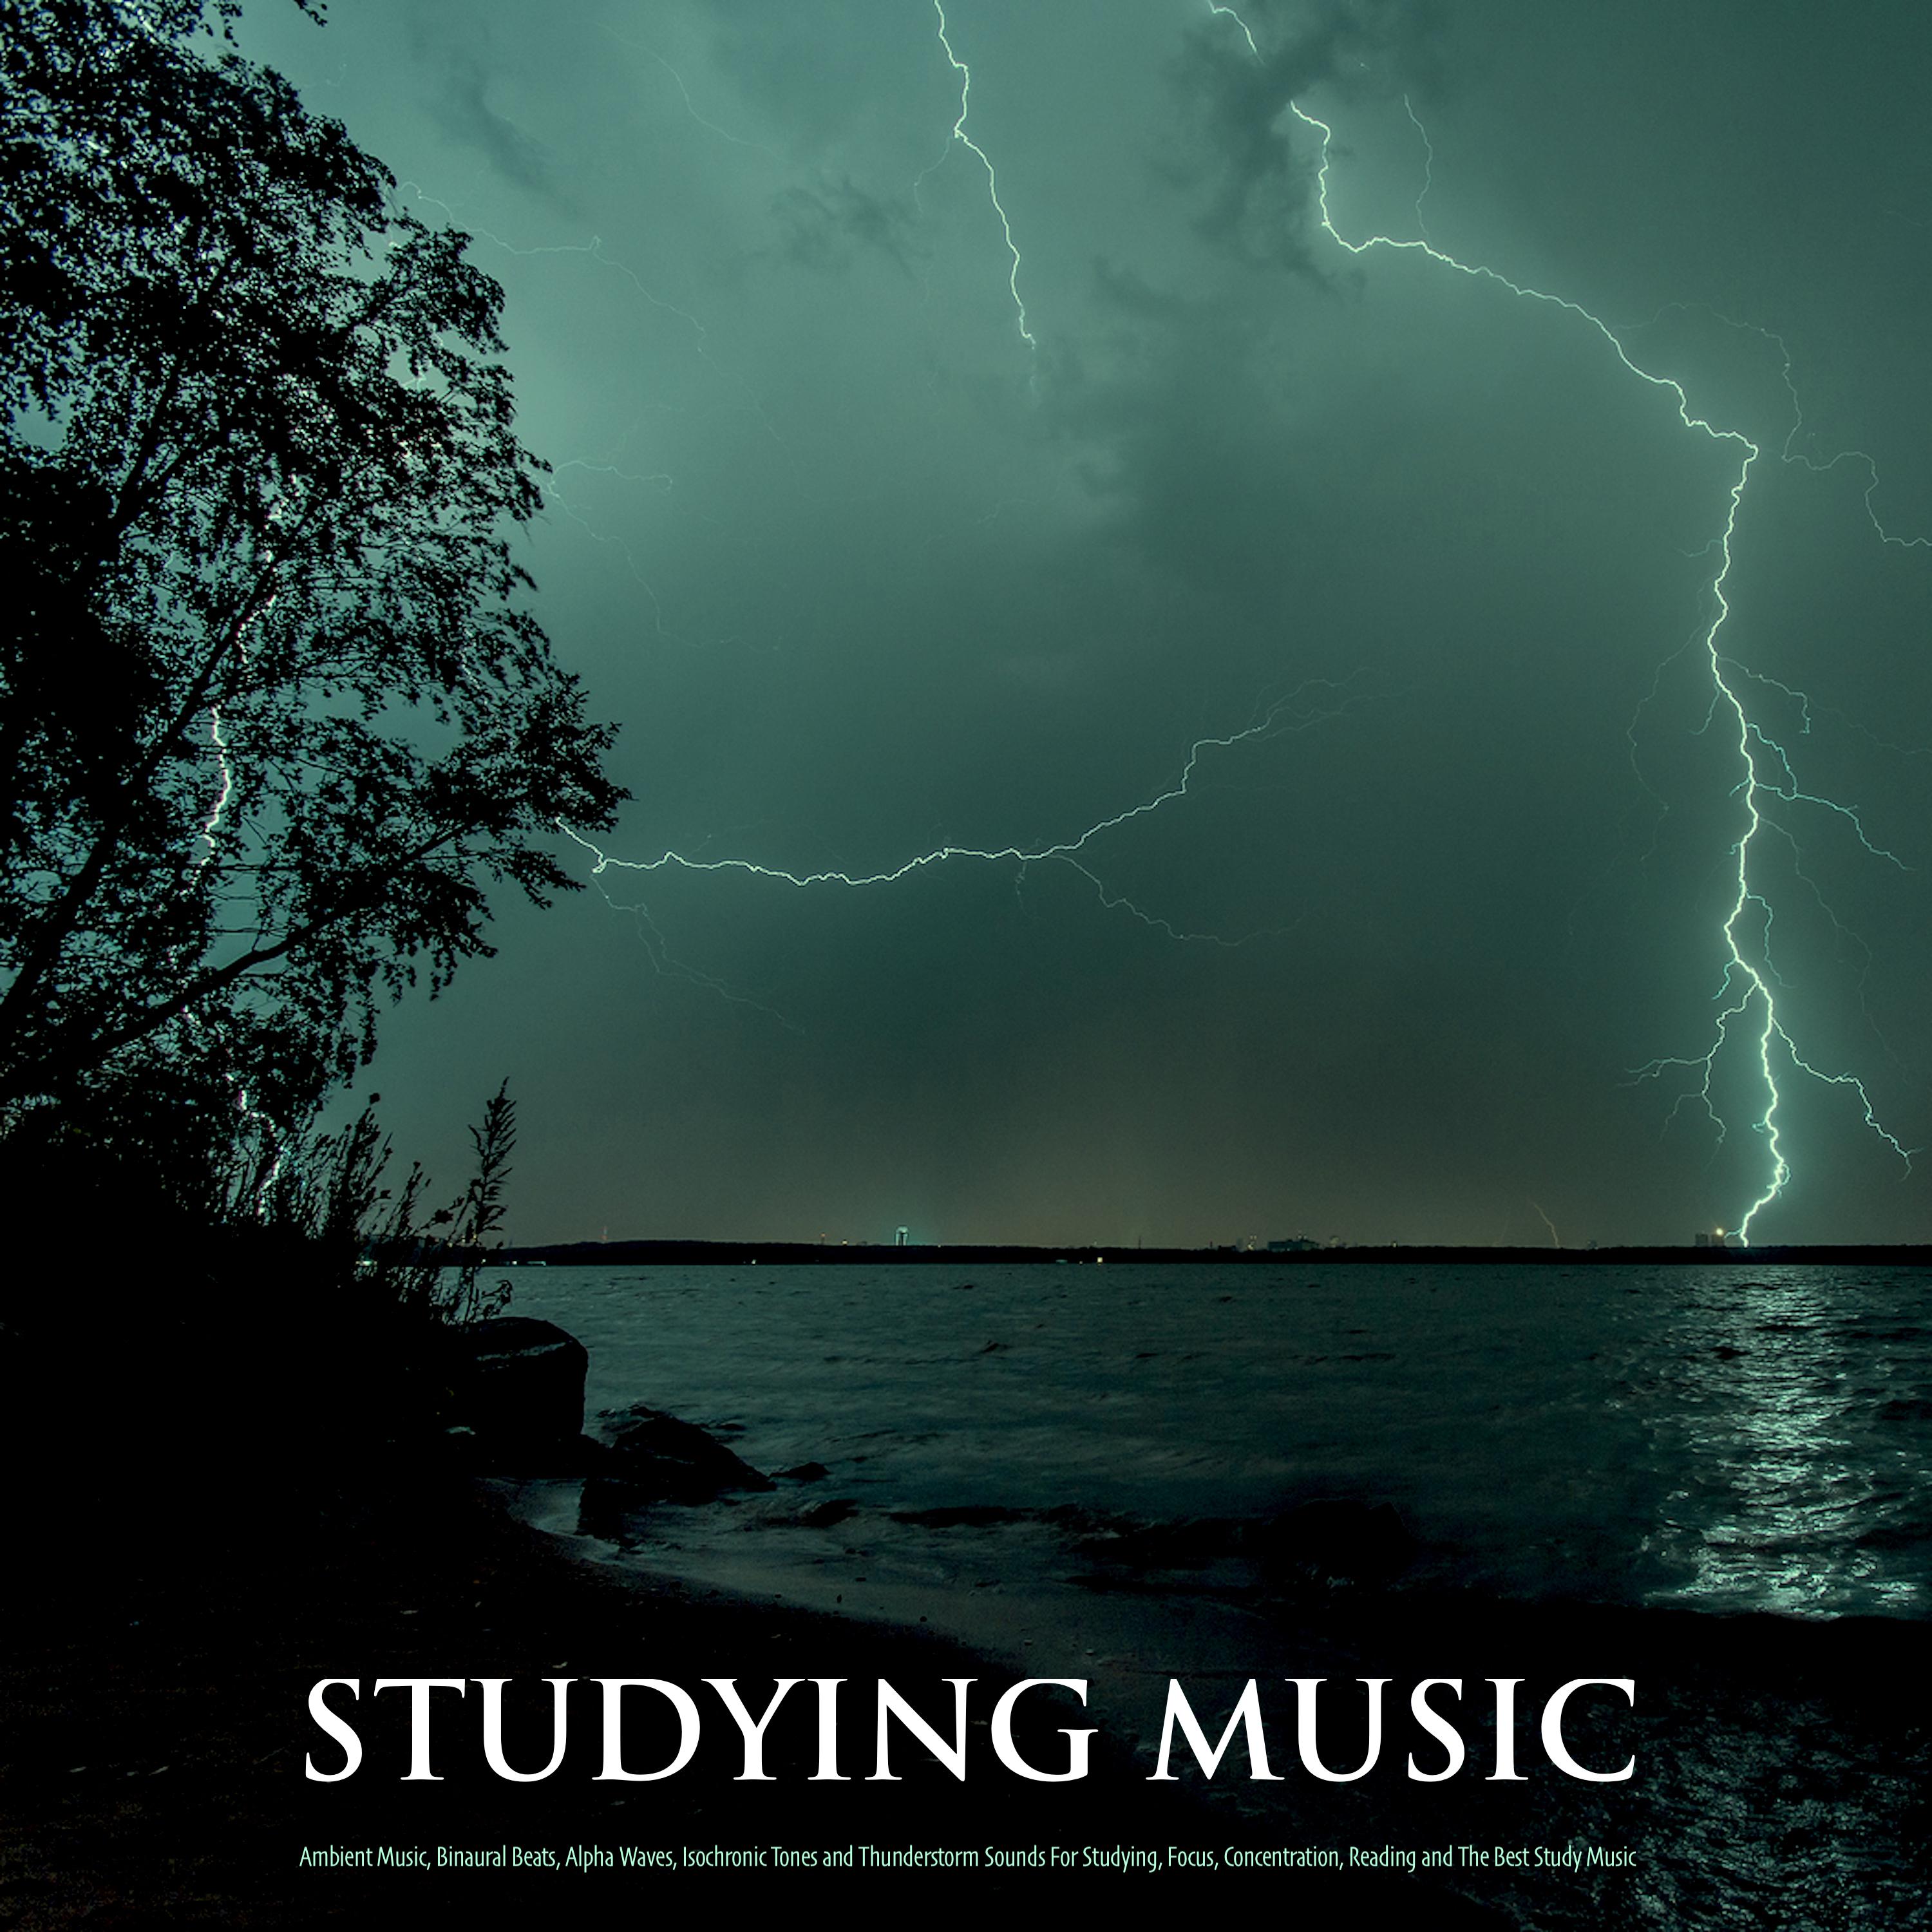 Studying Music with Calm Thunderstorms